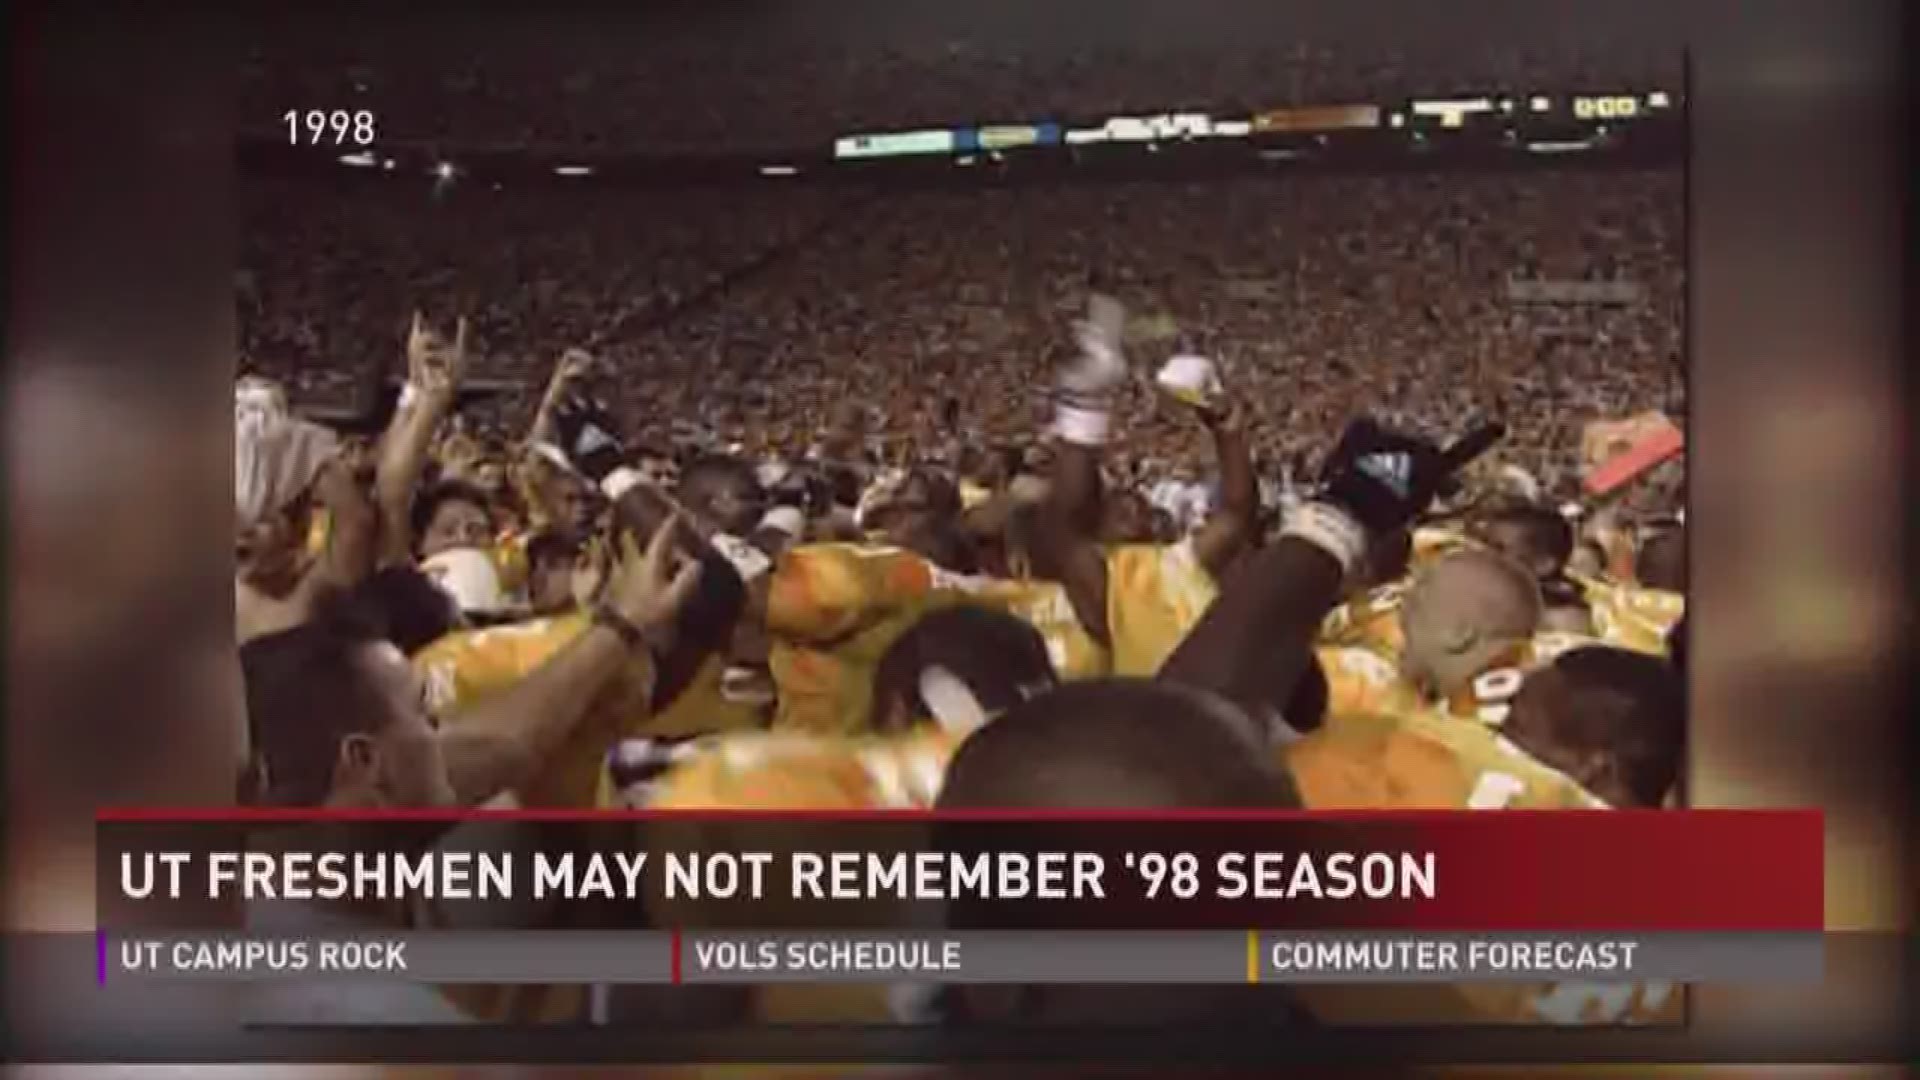 This year's freshmen class is the first to consist mostly of students who weren't alive for Tennessee's legendary National Championship win in 1998.